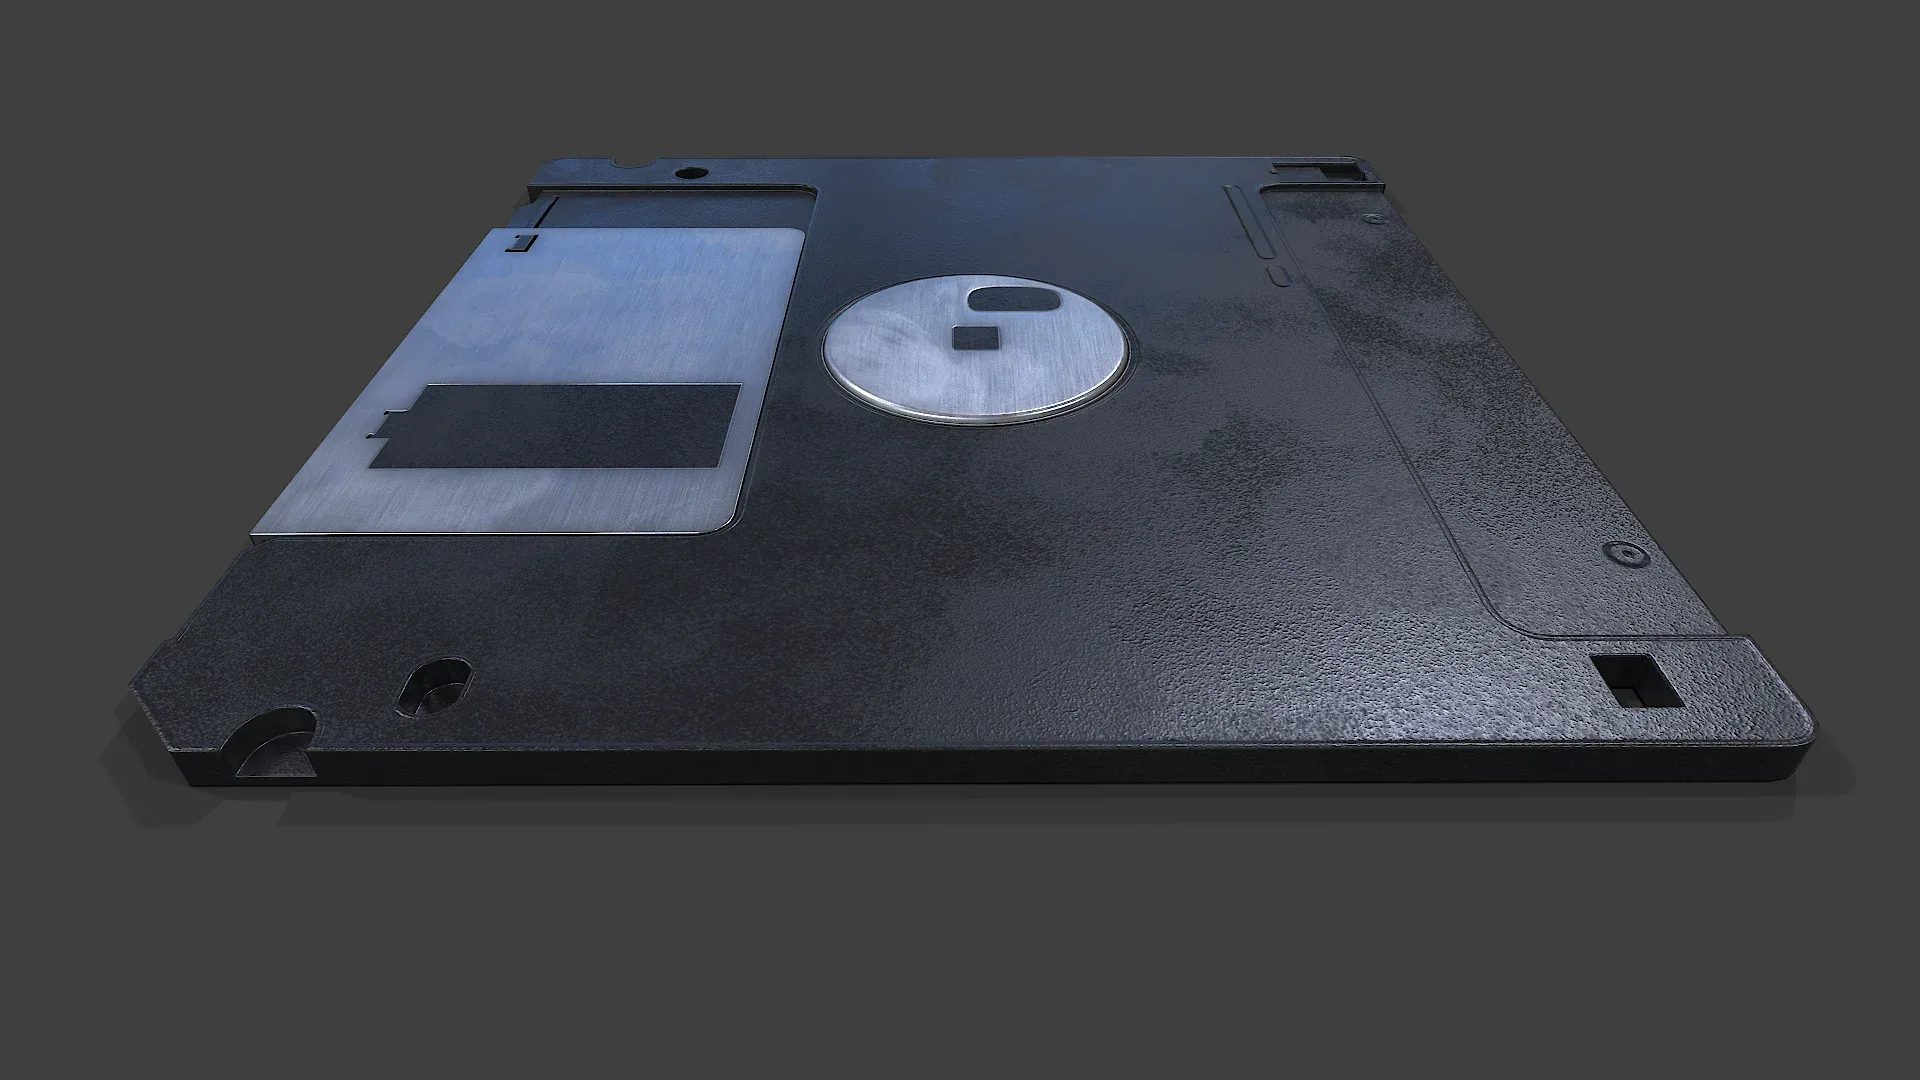 Floppy Disk - Low Poly